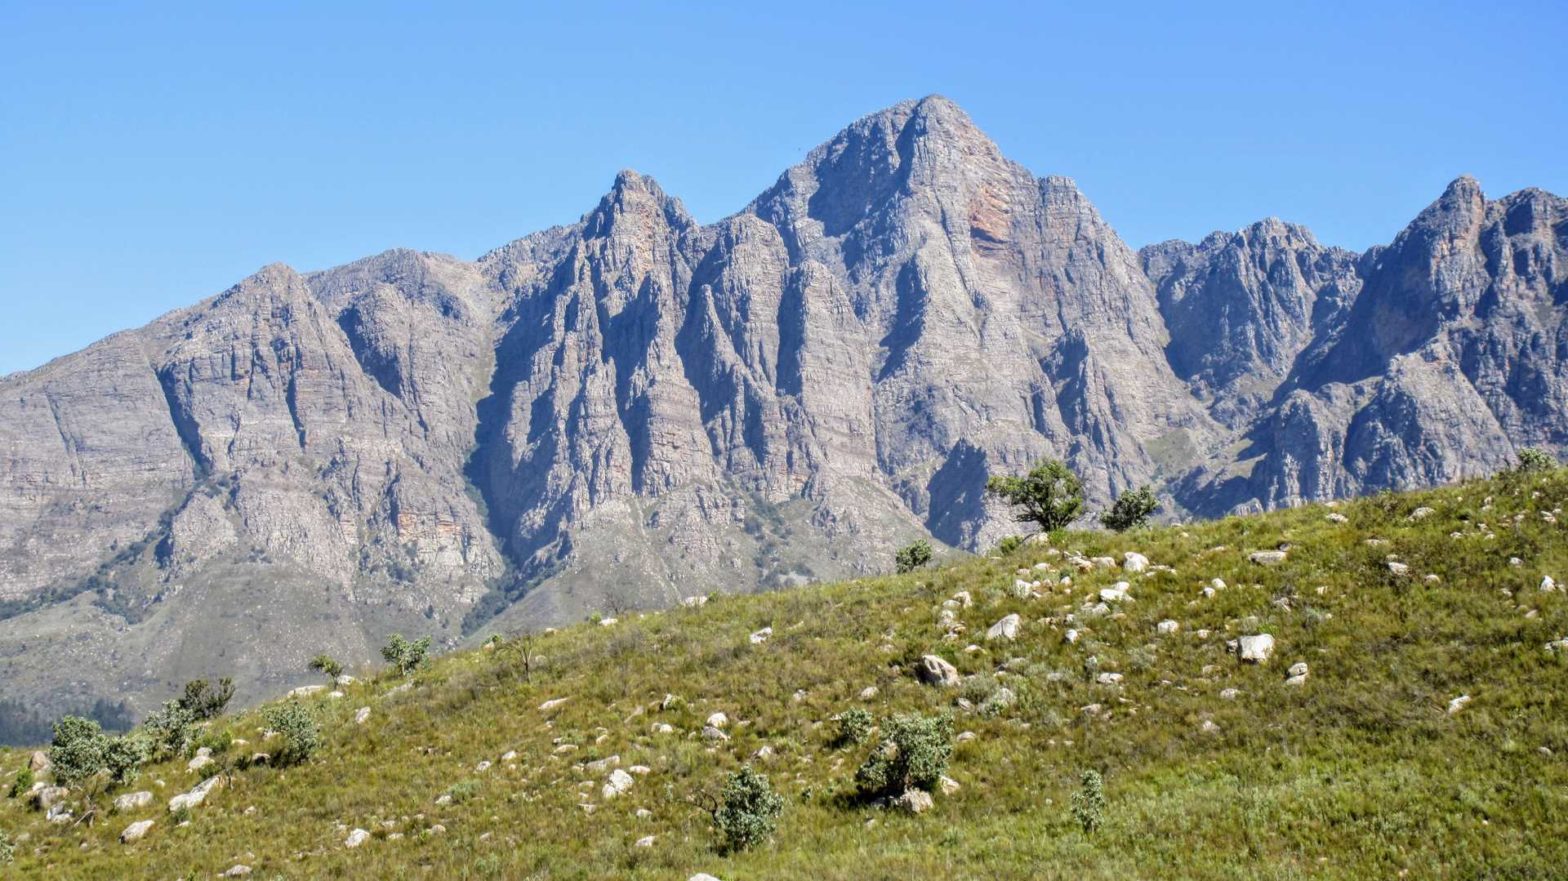 Steep rocky mountain, Tulbagh, South Africa